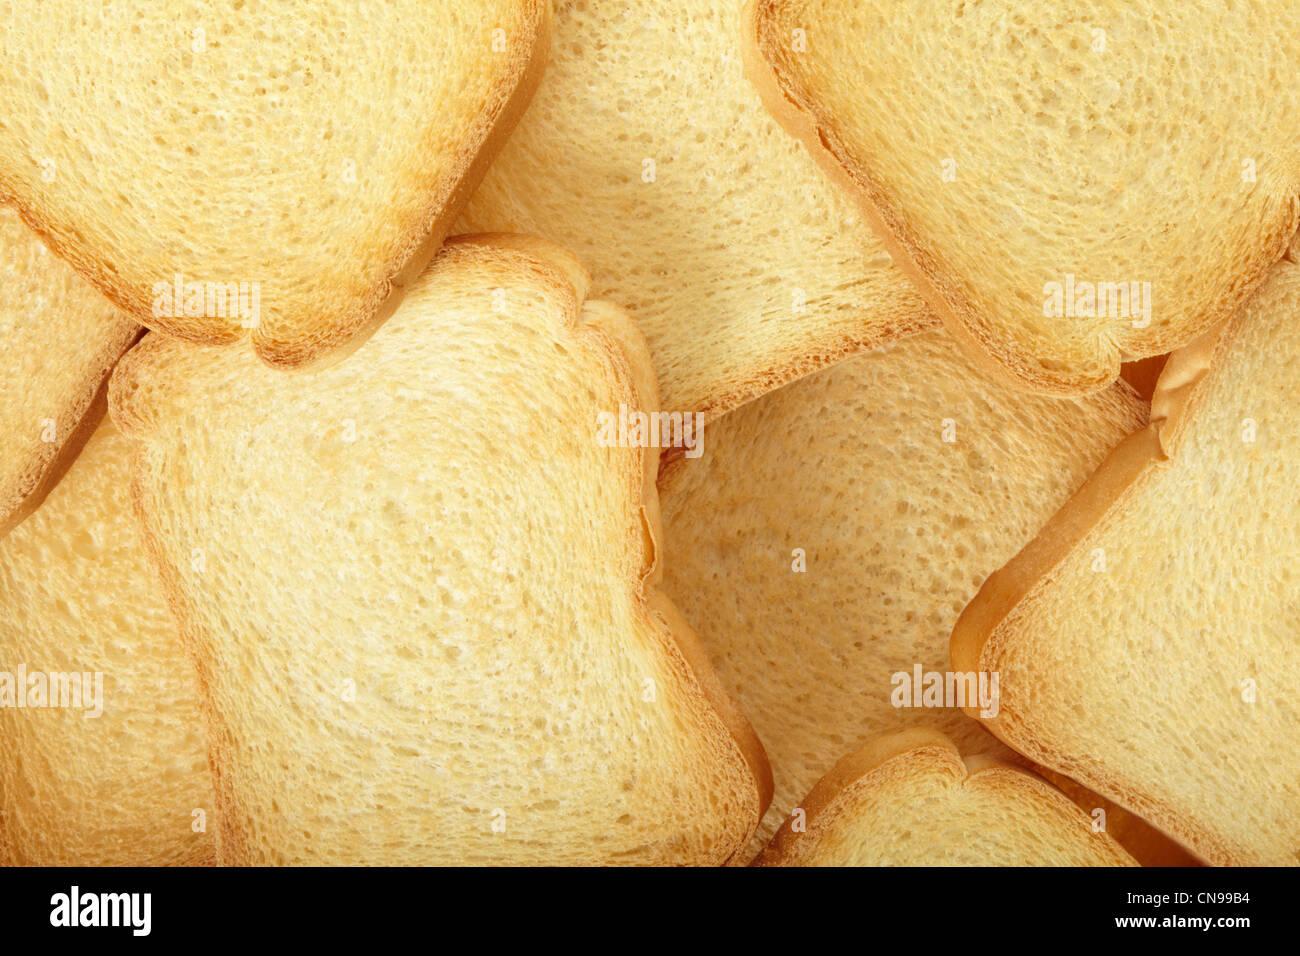 Rusk bread texture background Stock Photo